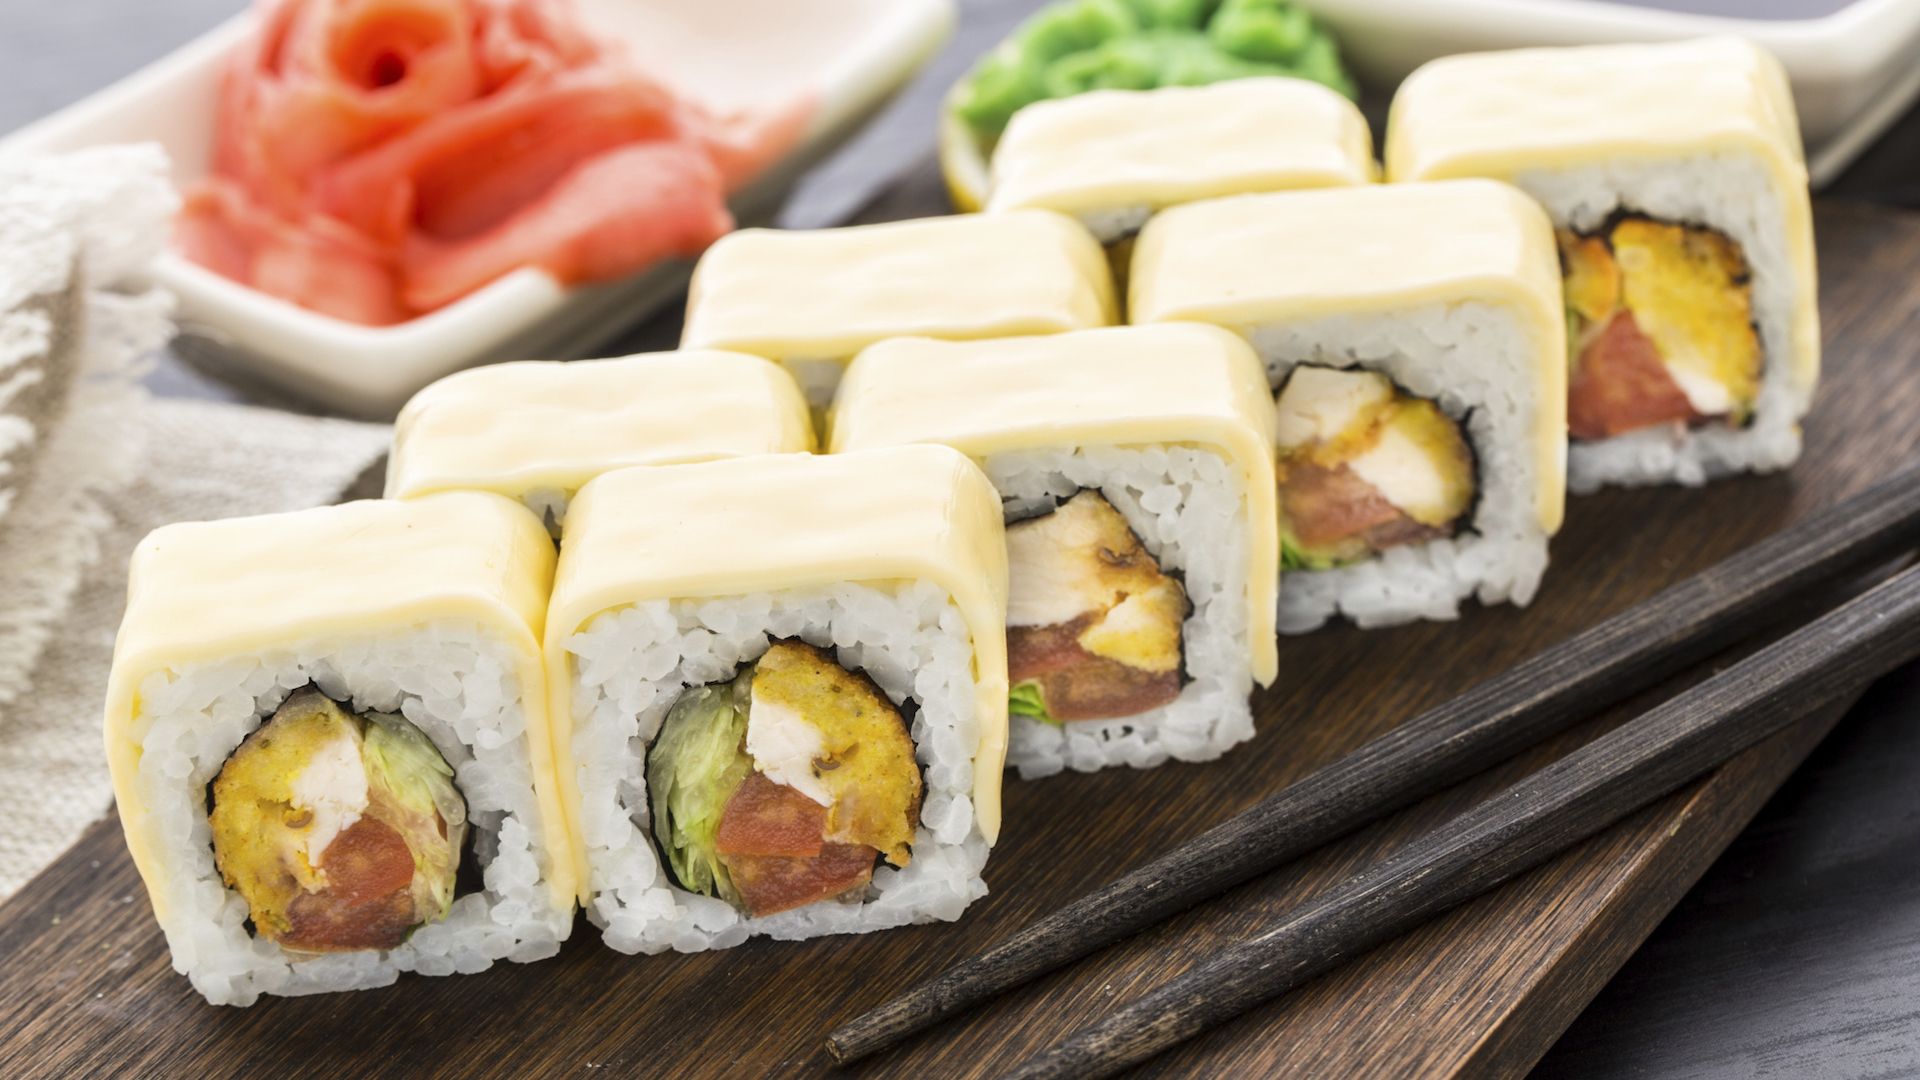 Rating of the best deliveries of sushi and rolls in Ufa in 2020